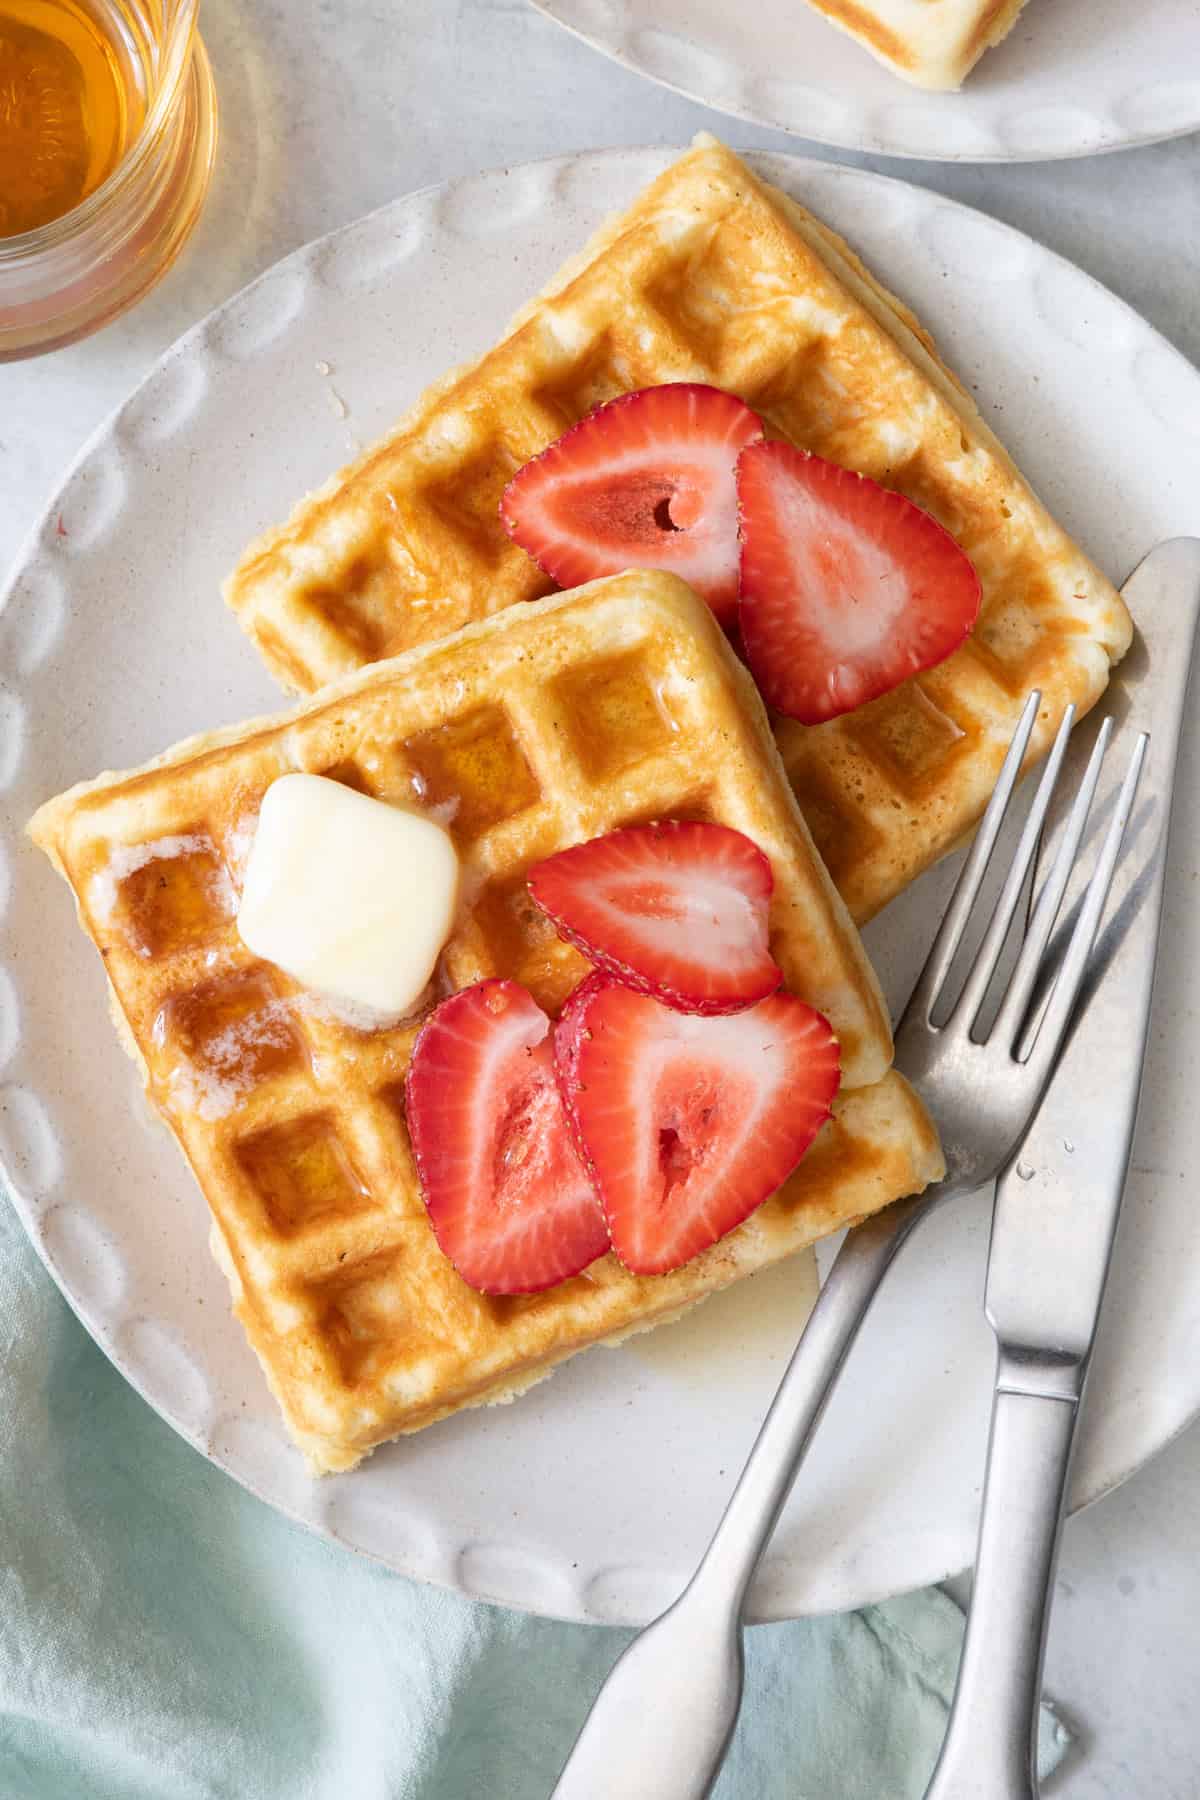 2 square waffles on a white plate with fork and knife, topped with sliced strawberries and butter.